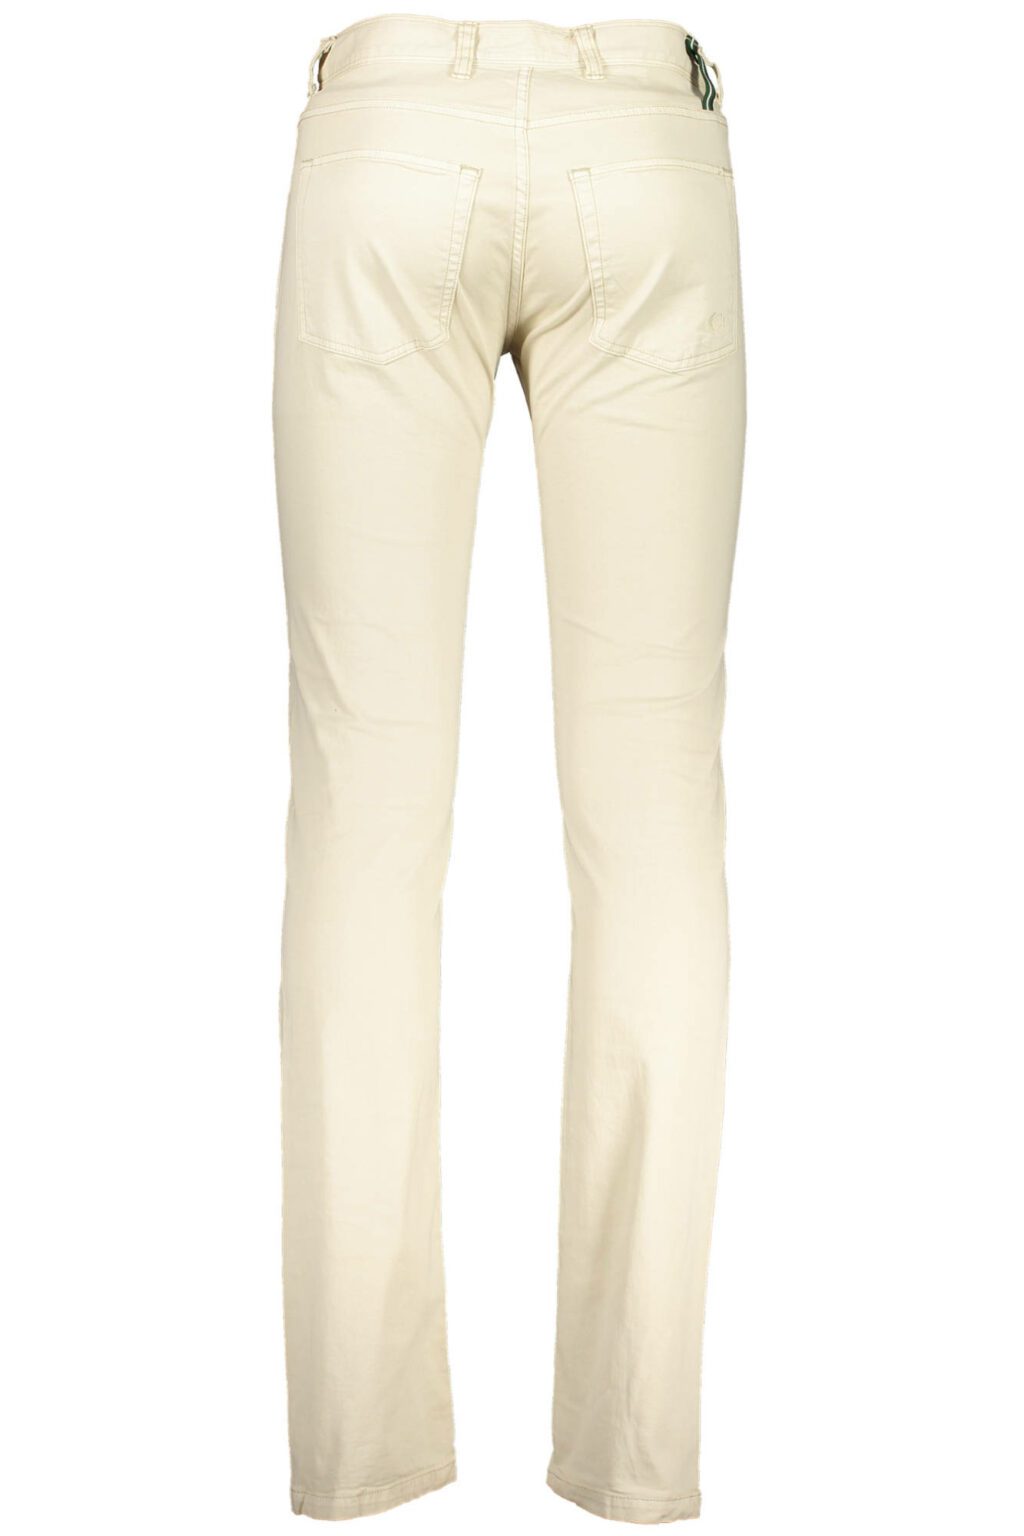 FRED PERRY BEIGE MAN TROUSERS 30502586_BEIGE_7001